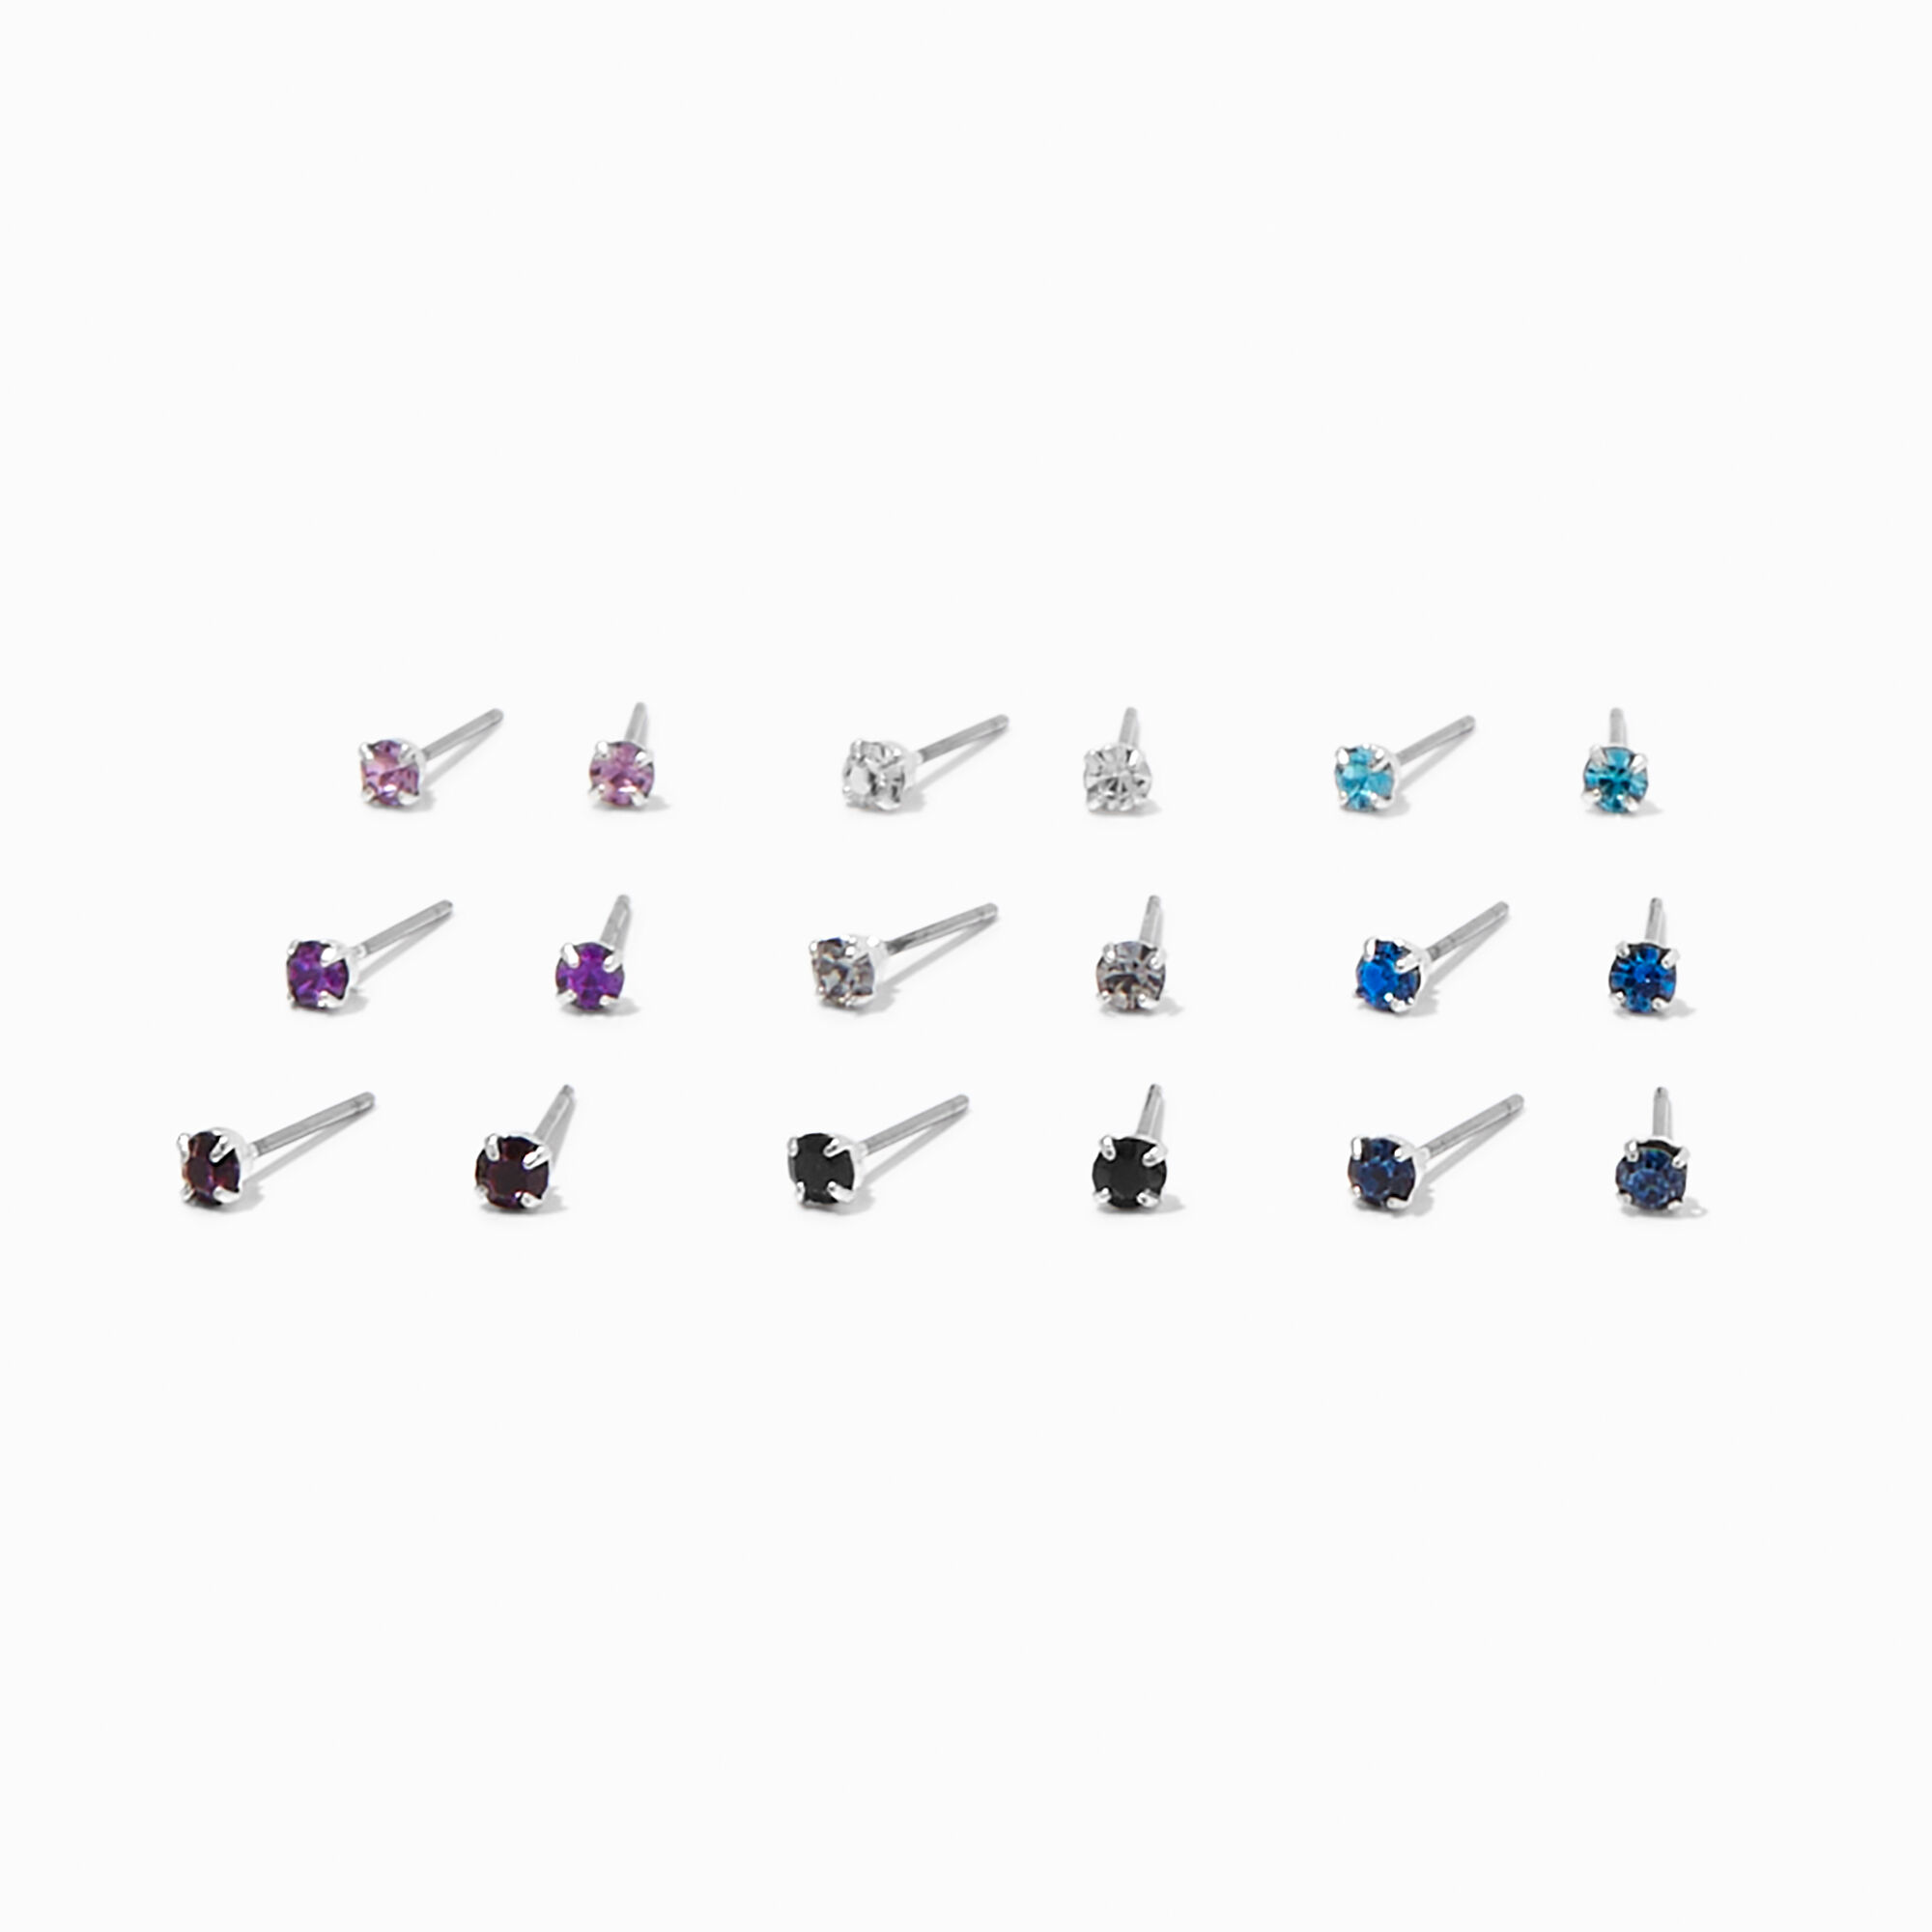 claire's blue mixed 3mm crystal stud earrings - 9 pack